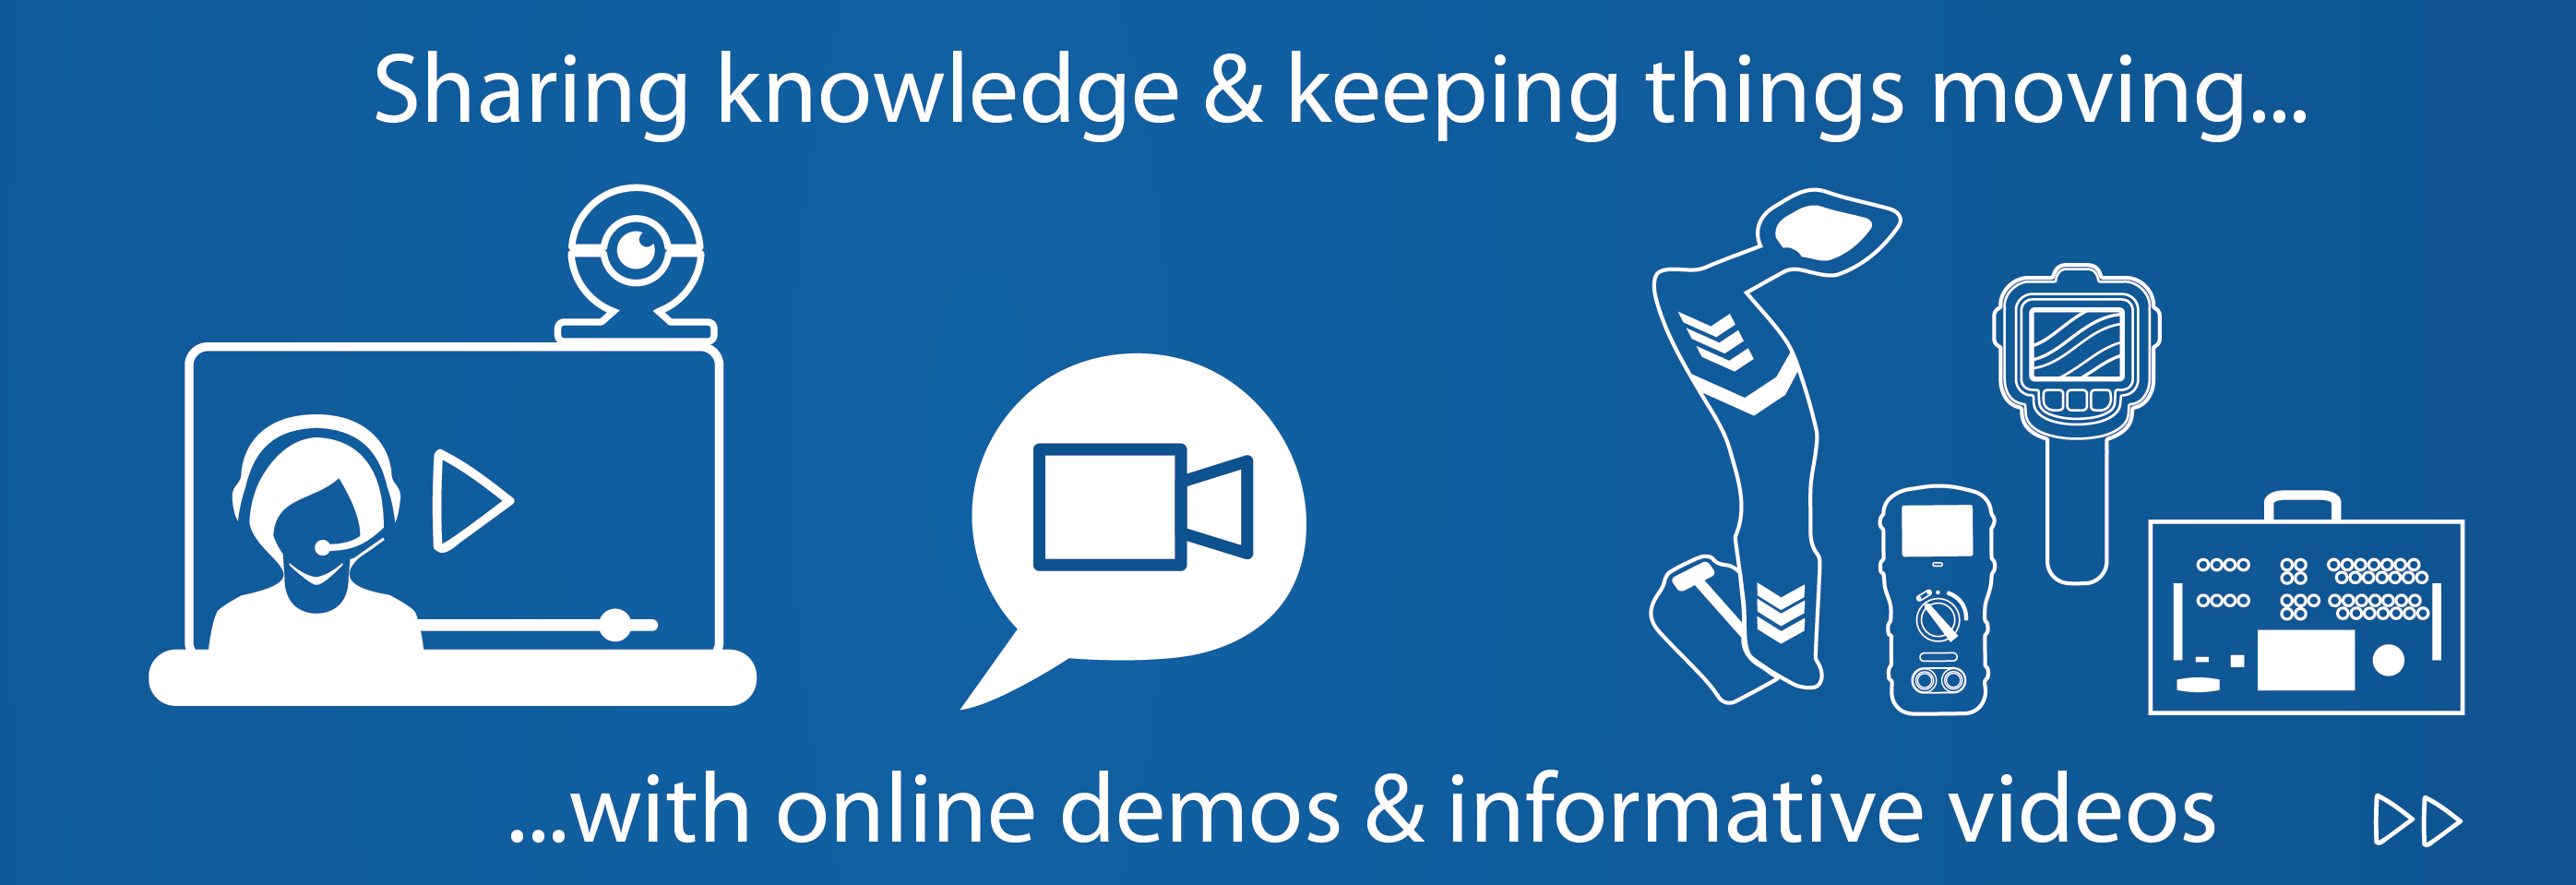 Sharing knowledge & keeping things moving with online demos & informative videos